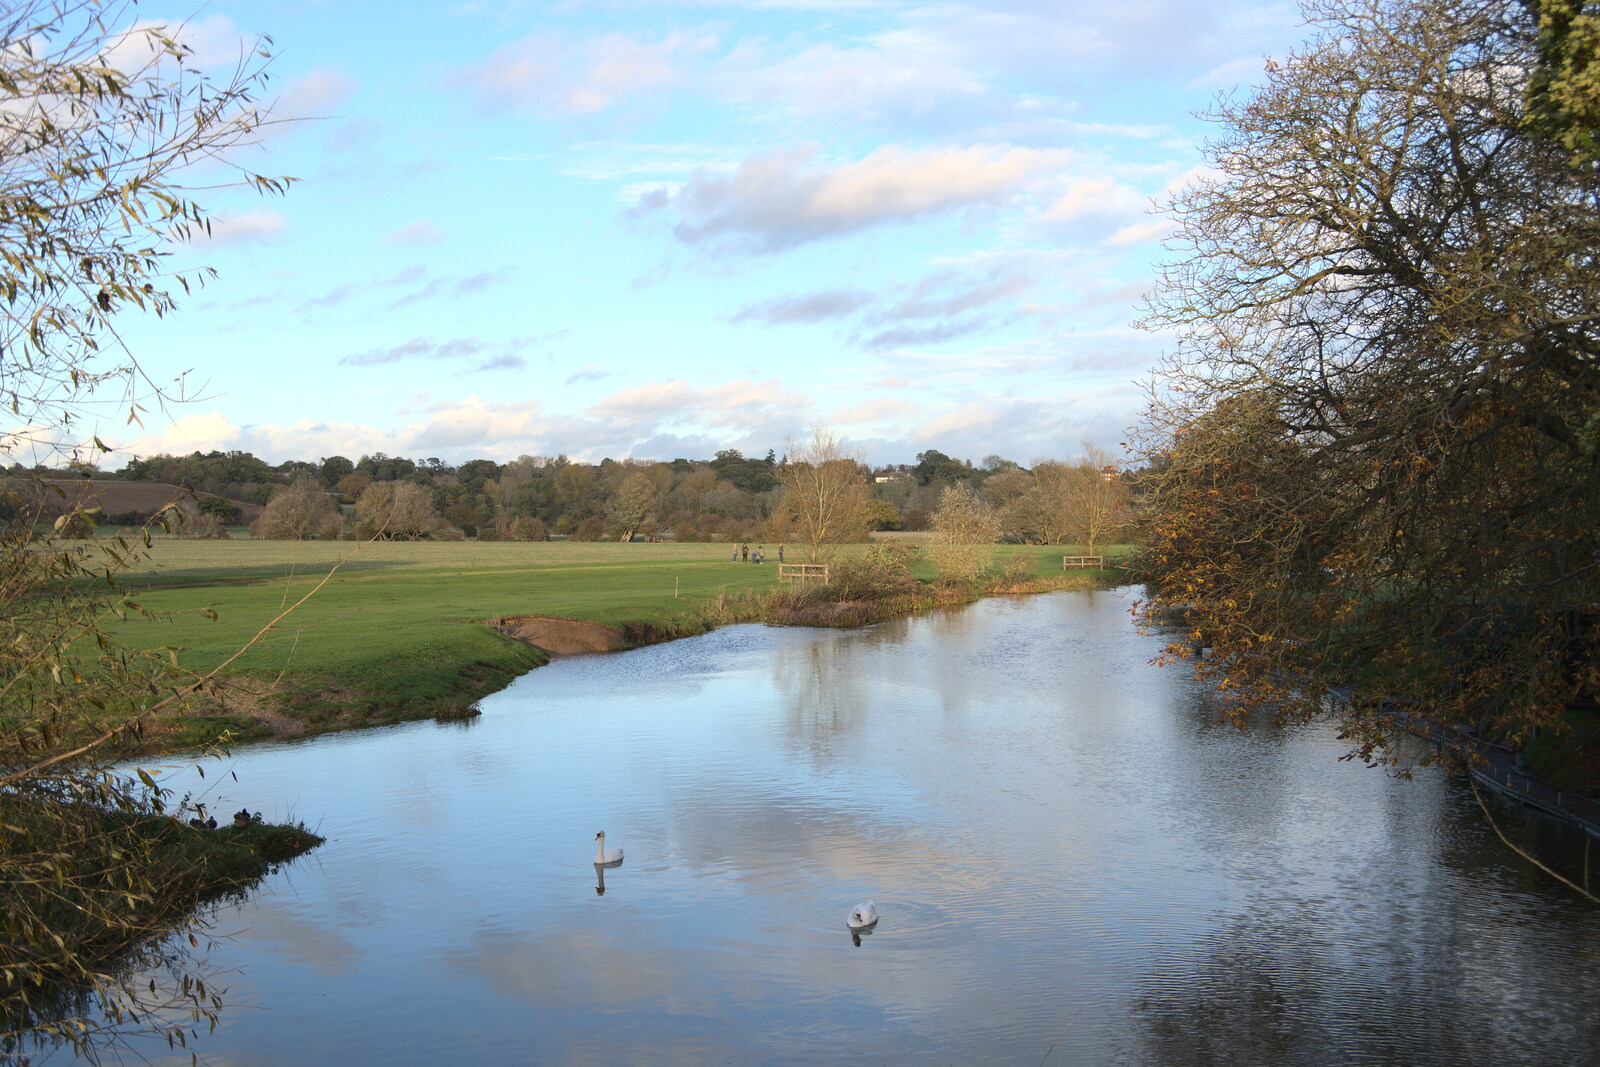 A Postcard from Flatford and Dedham, Suffolk and Essex, 9th November 2022: A view over the Stour, looking towards Flatford